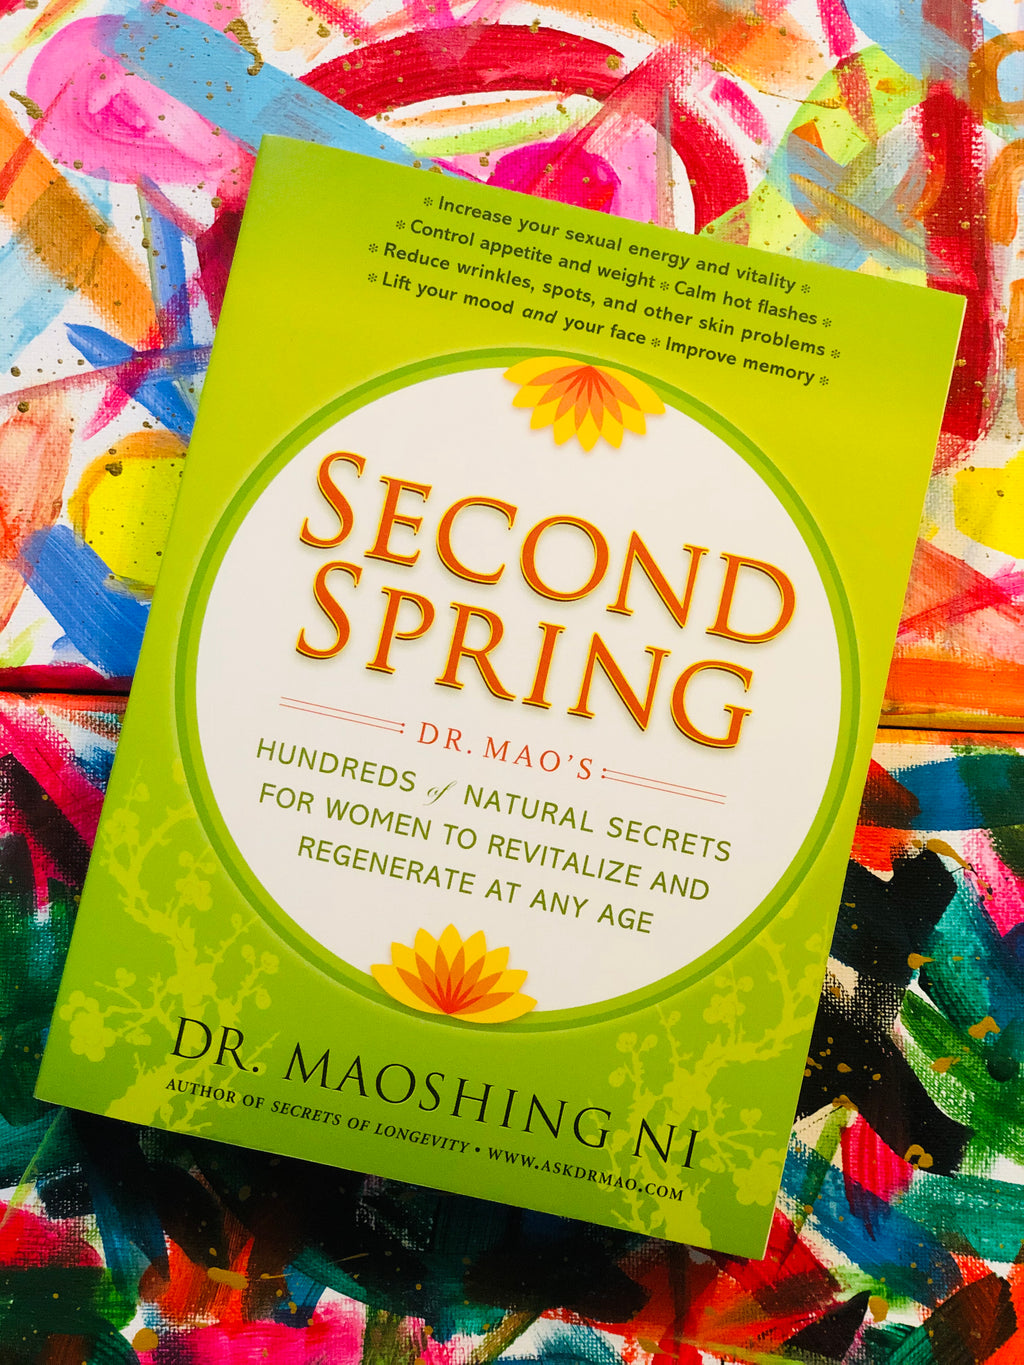 Second Spring by Dr. Maoshing Ni